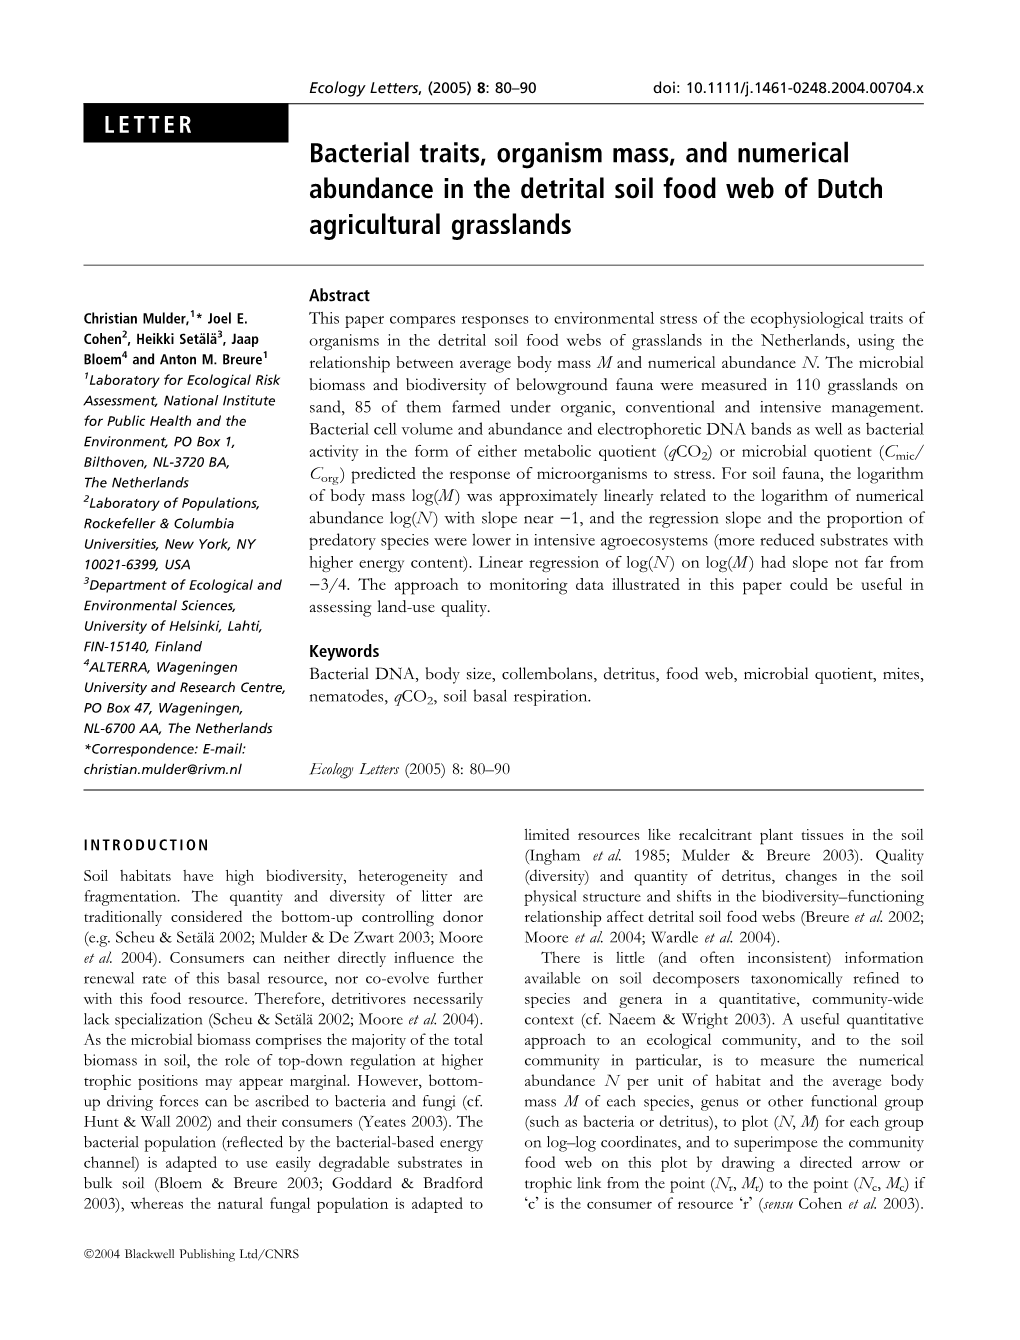 Bacterial Traits, Organism Mass, and Numerical Abundance in the Detrital Soil Food Web of Dutch Agricultural Grasslands